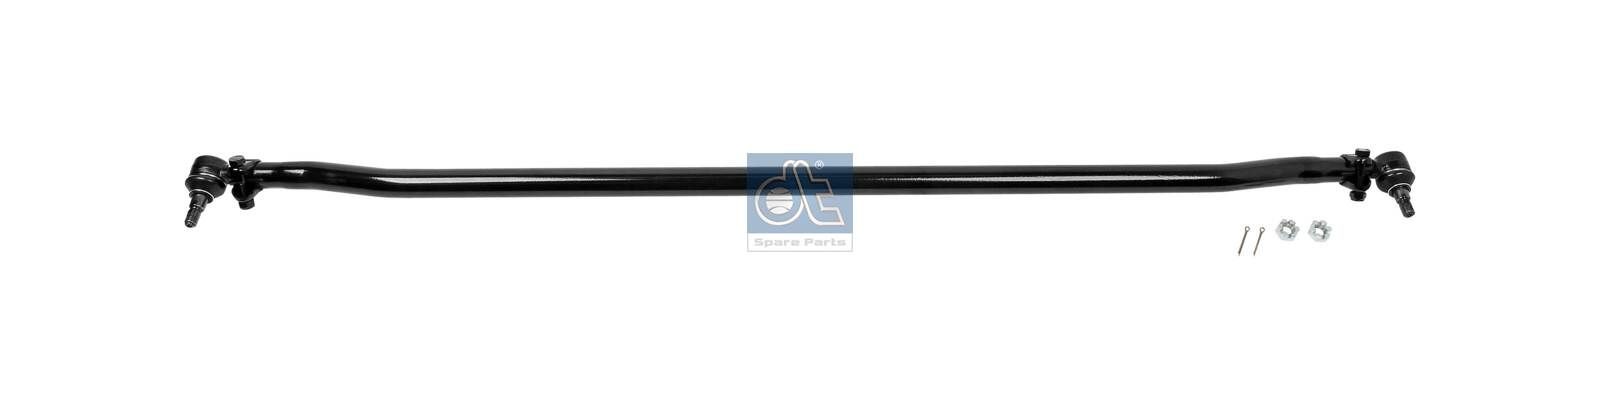 Mercedes VITO Tie rod axle joint 8267061 DT Spare Parts 4.67440 online buy